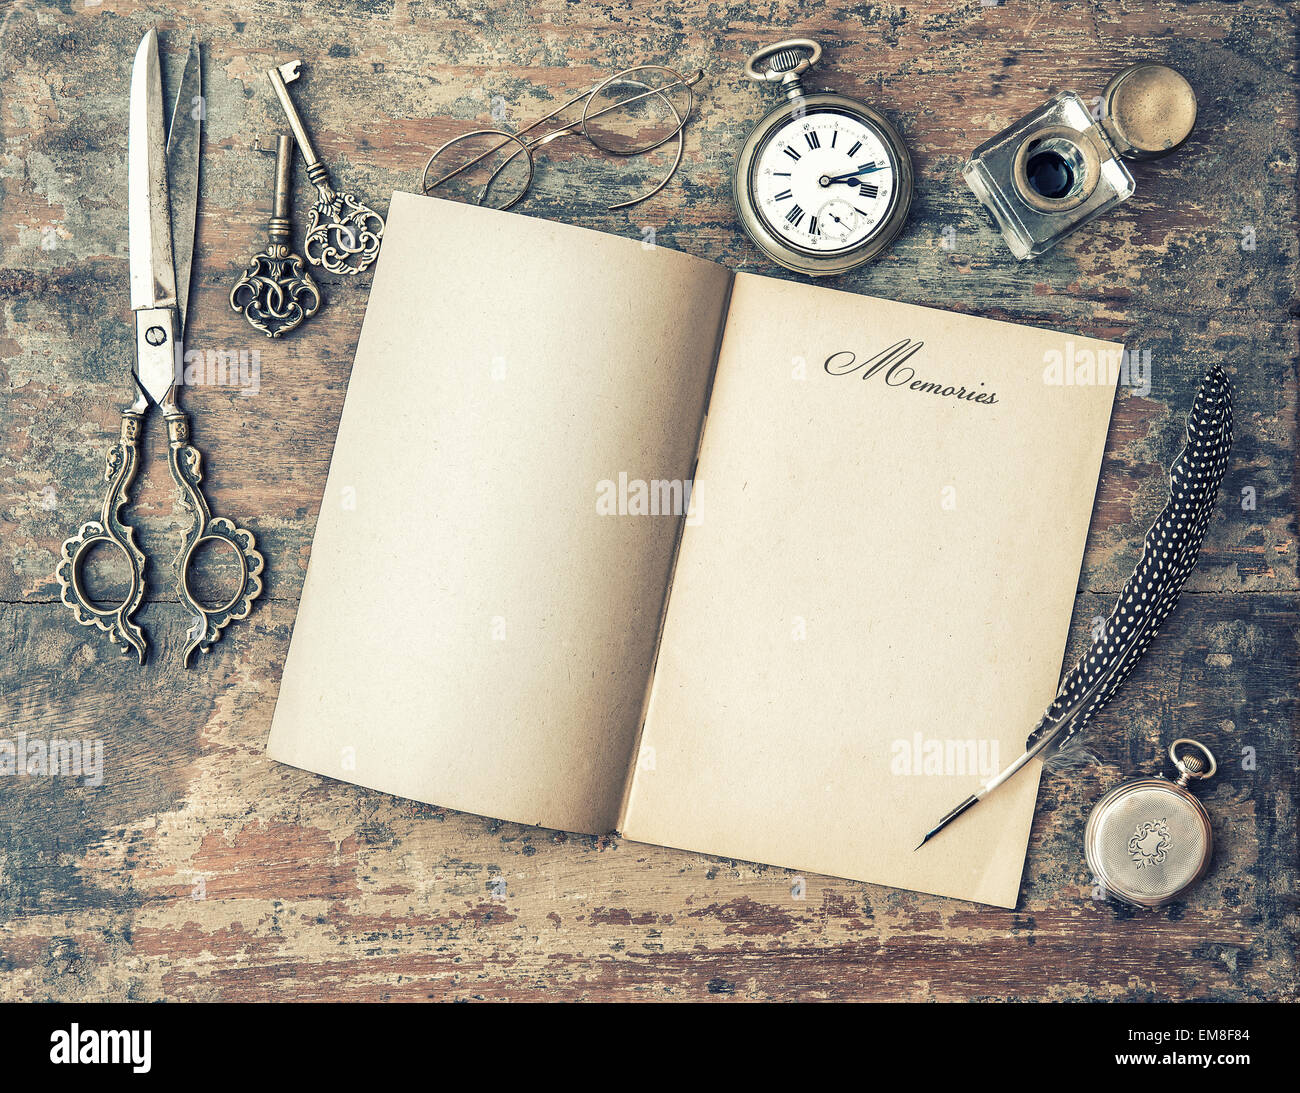 Open journal book and vintage writing tools. Feather pen, inkwell, keys on textured wooden background. Memories. Stock Photo